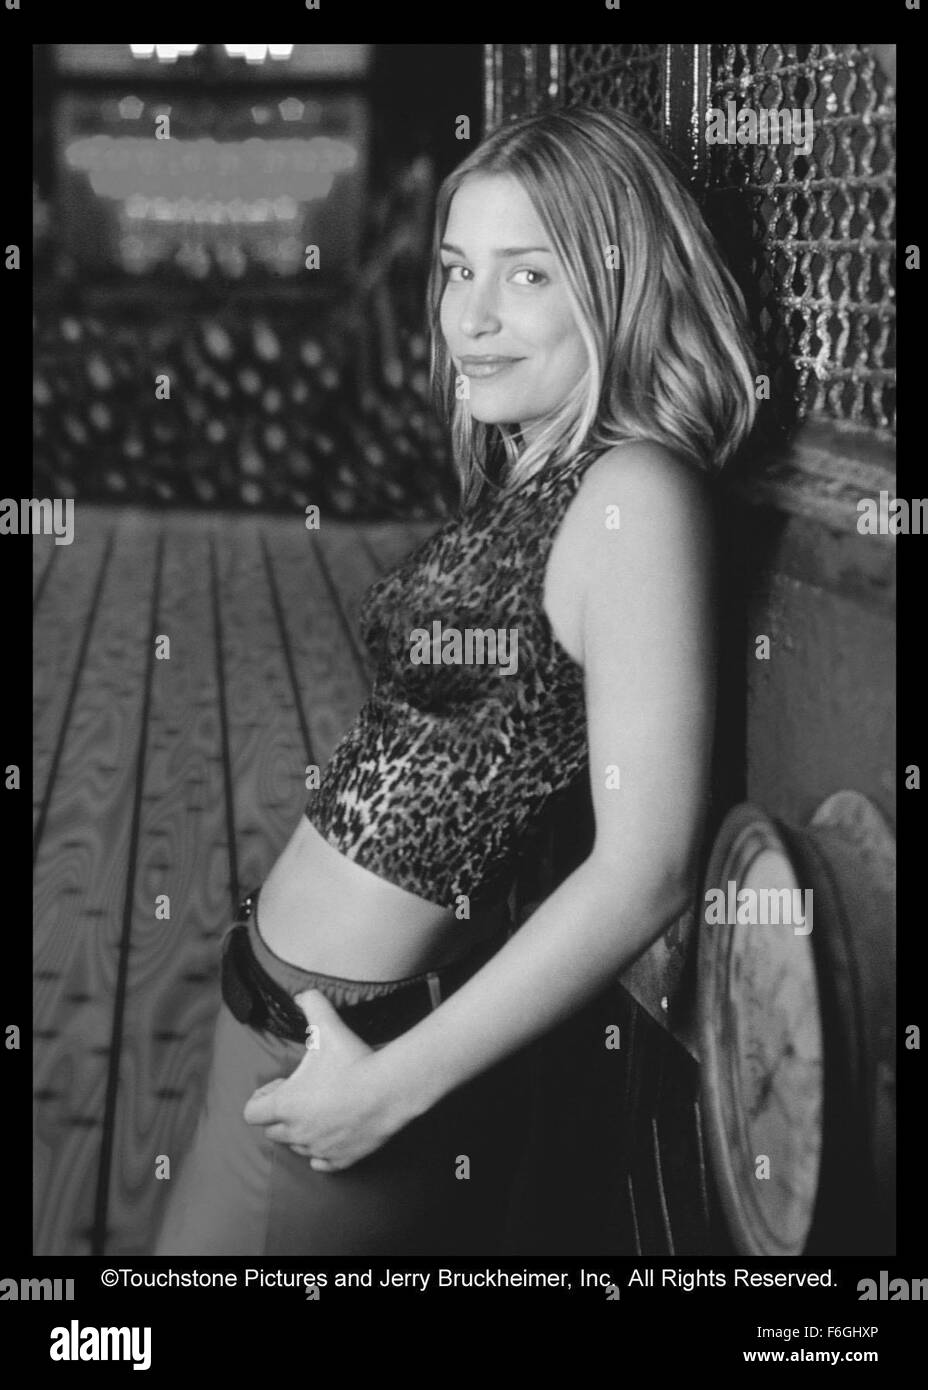 RELEASE DATE: August 04, 2000.   MOVIE TITLE: Coyote Ugly.   STUDIO: Touhcstone Pictures.   DIRECTOR: David McNally.   PLOT: Aspiring songwriter Violet Sanford, after getting a job at a women-run NYC bar that teases its male patrons, comes out of her shell.   PICTURED: Piper Parabo as Violet Sanford   (Credit Image: c  Touchstone Pictures/Entertainment Pictures) Stock Photo